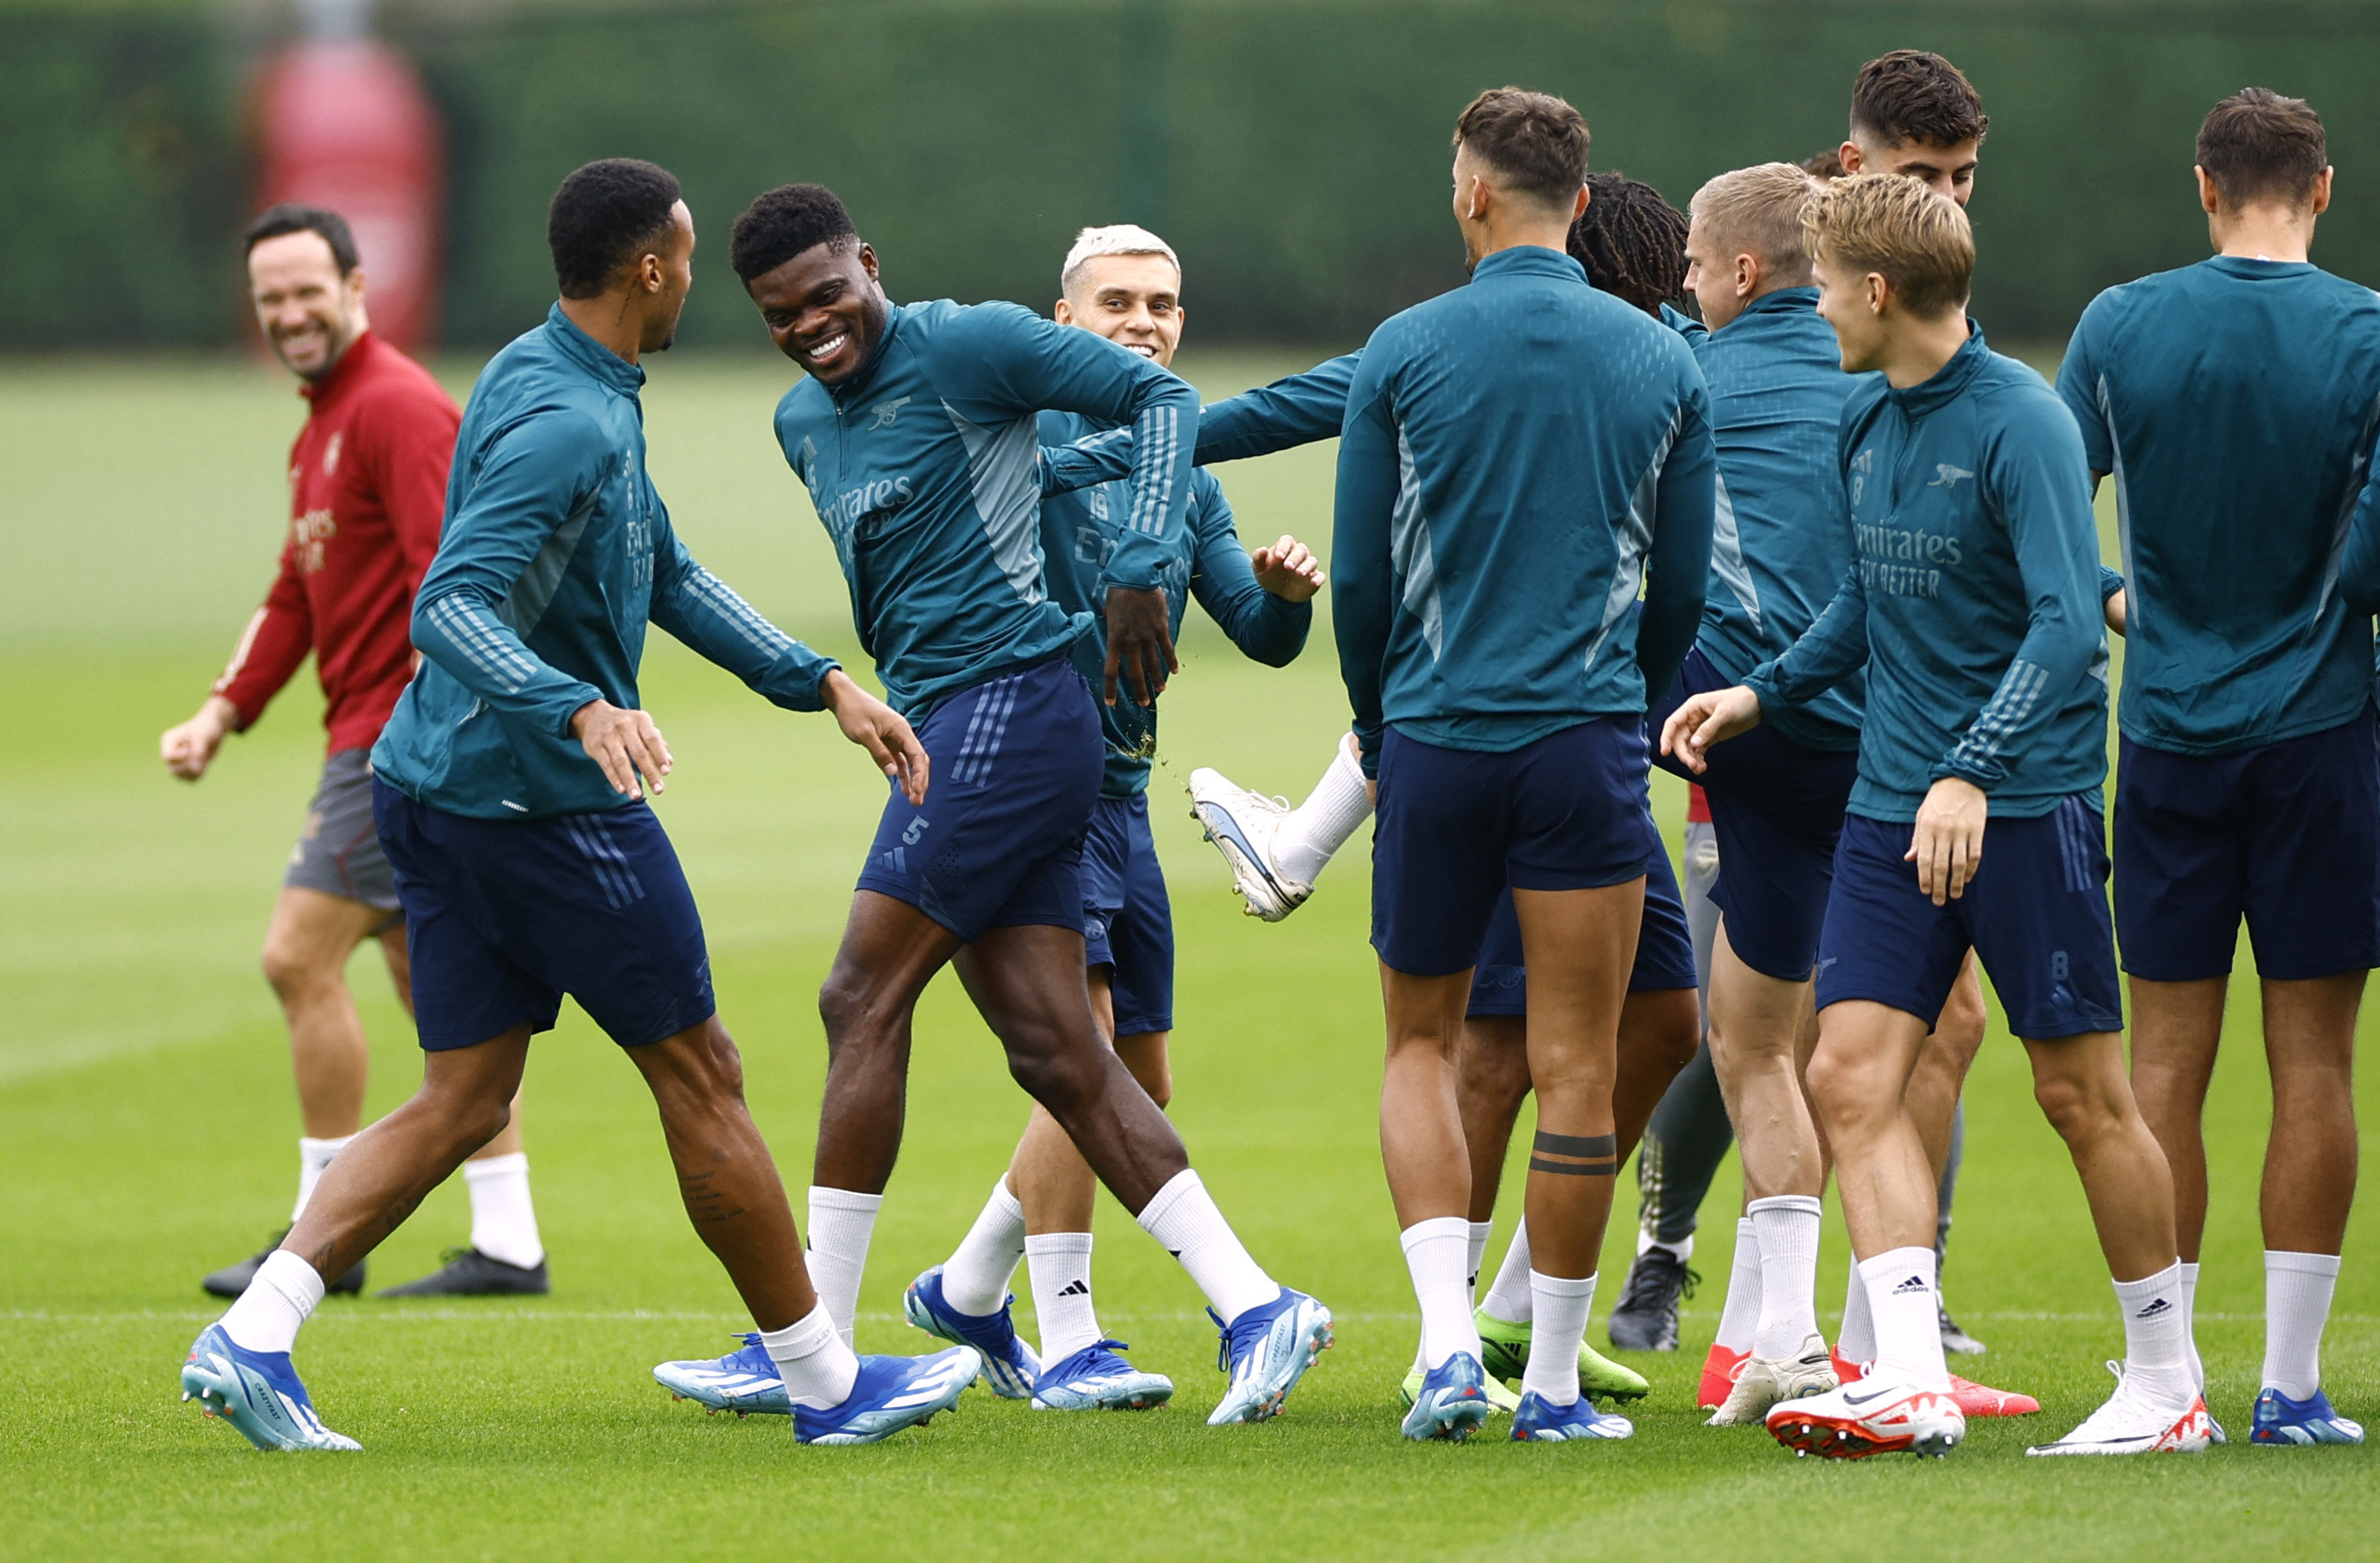 Arsenal players on international duty – call-ups and fixtures